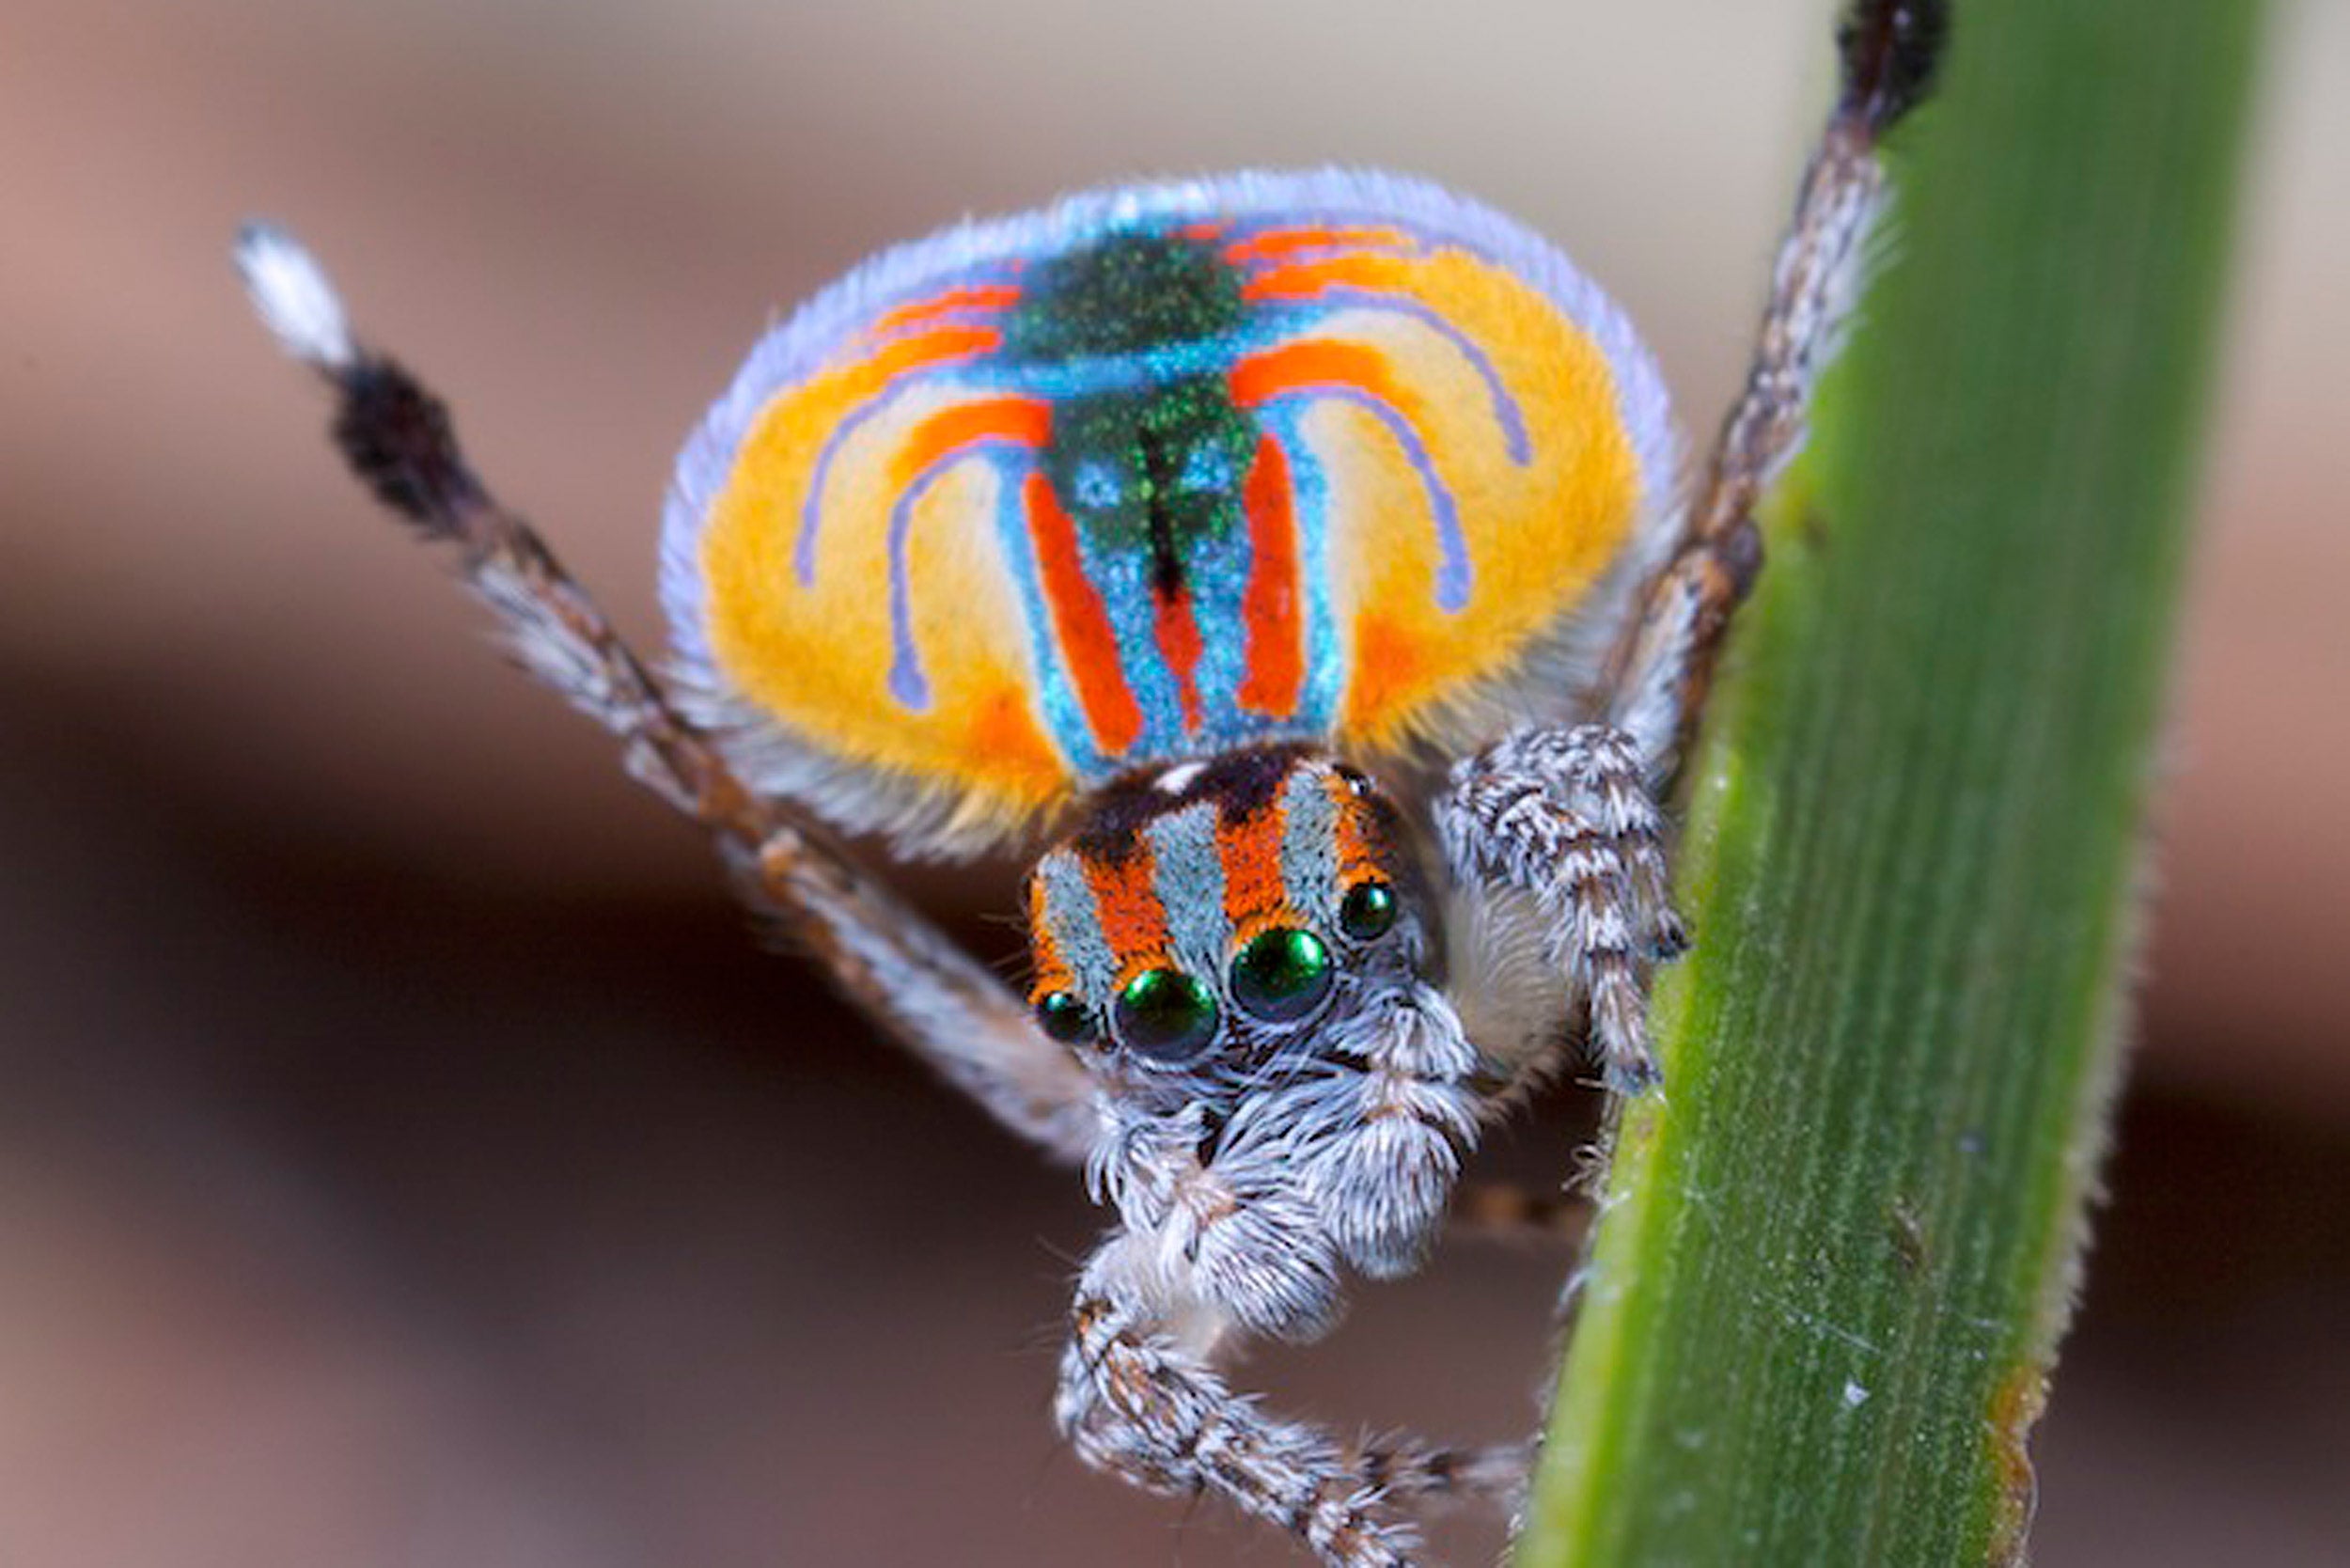 Peacock spider.